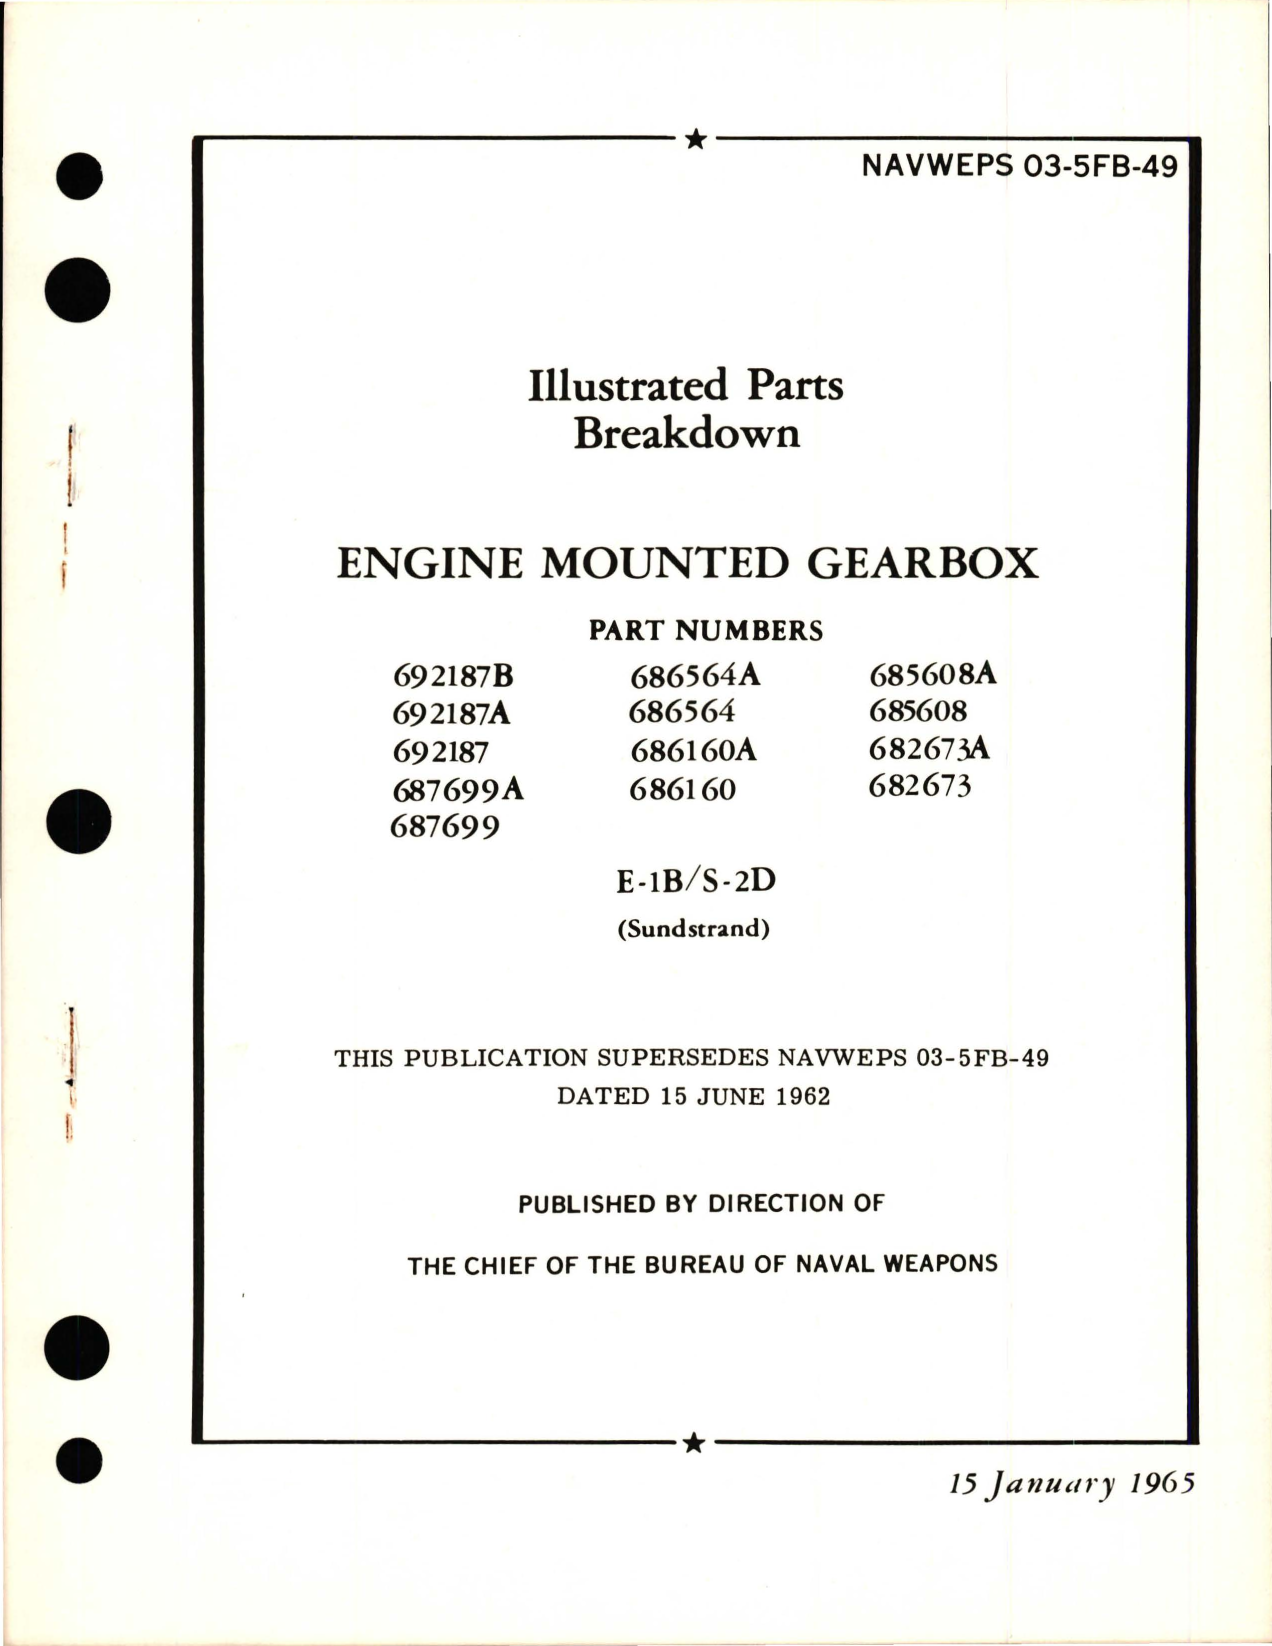 Sample page 1 from AirCorps Library document: Illustrated Parts Breakdown for Engine Mounted Gearbox - E-1B and S-2D